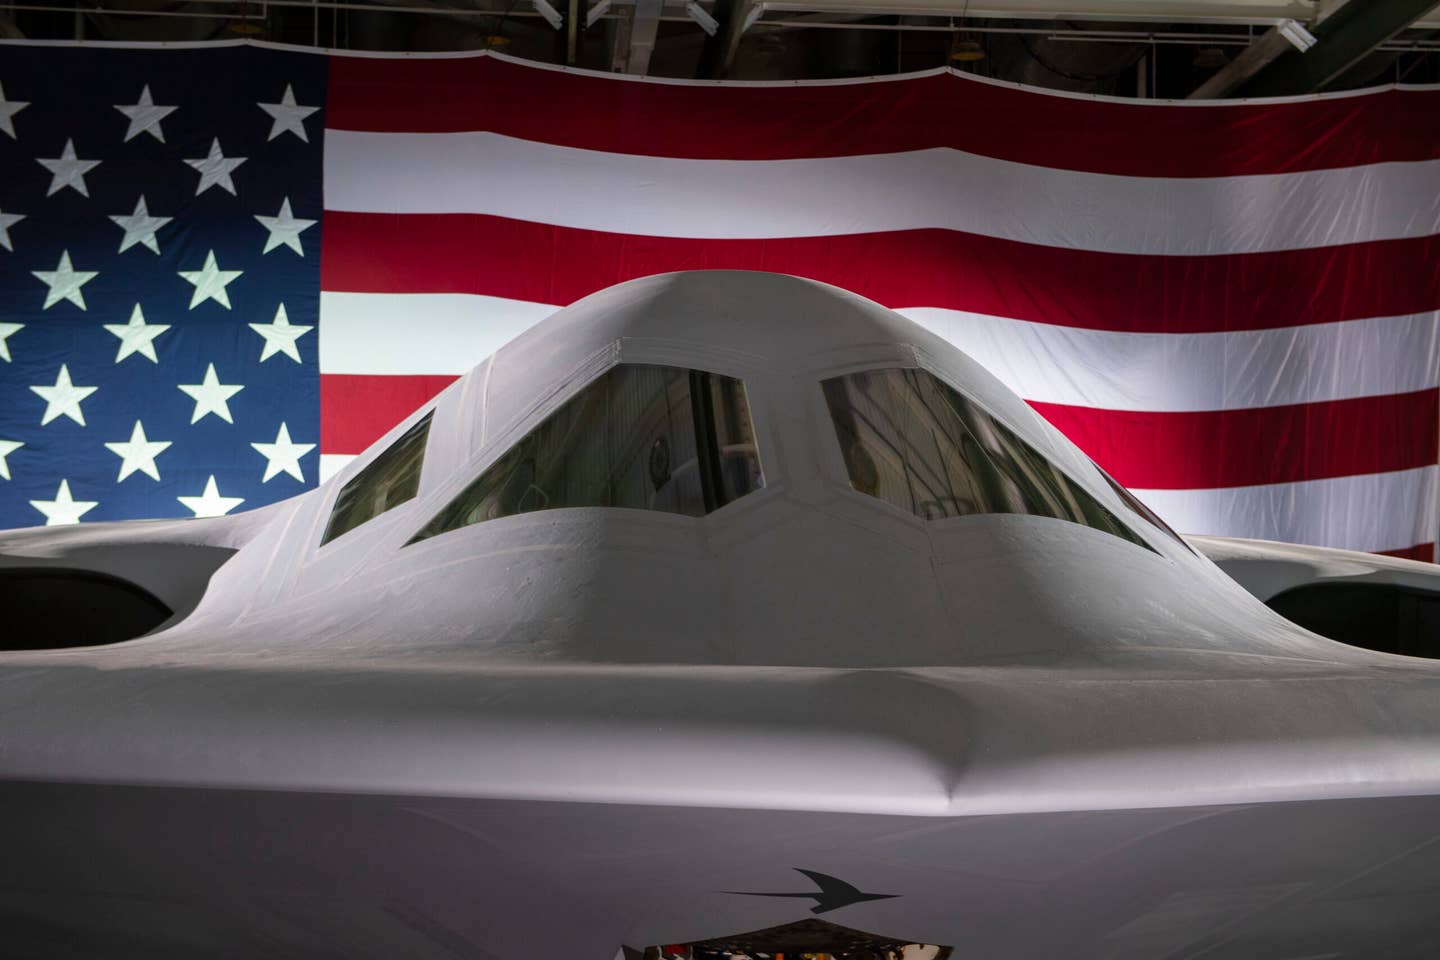 The B-21 Raider was unveiled to the public at a ceremony Dec. 2, 2022 in Palmdale, California. (U.S. Air Force photo)